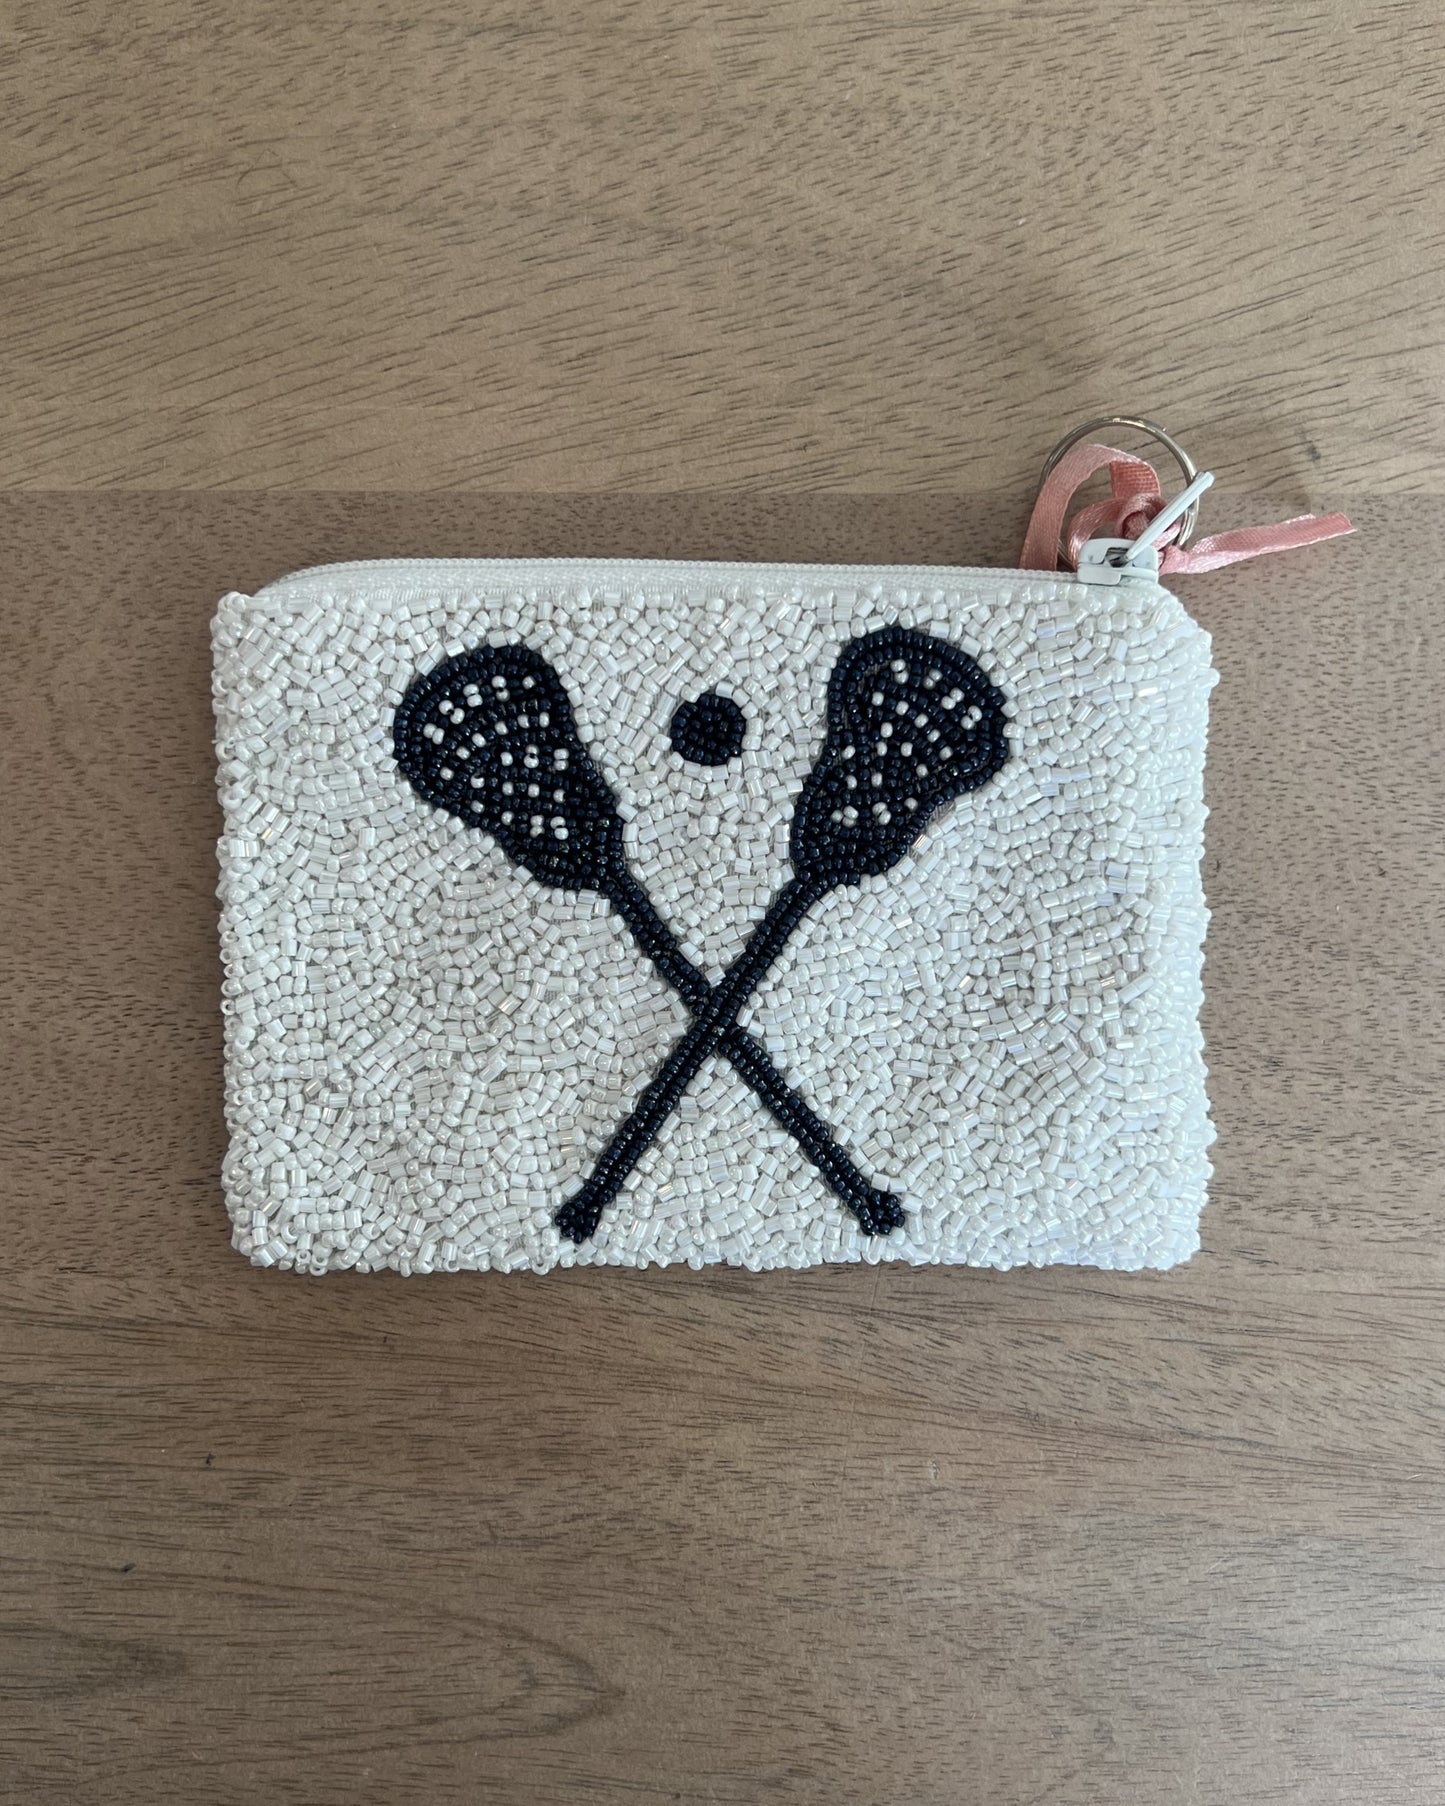 Image of Middlebury College Lacrosse White/Navy Coin purse on a brown background